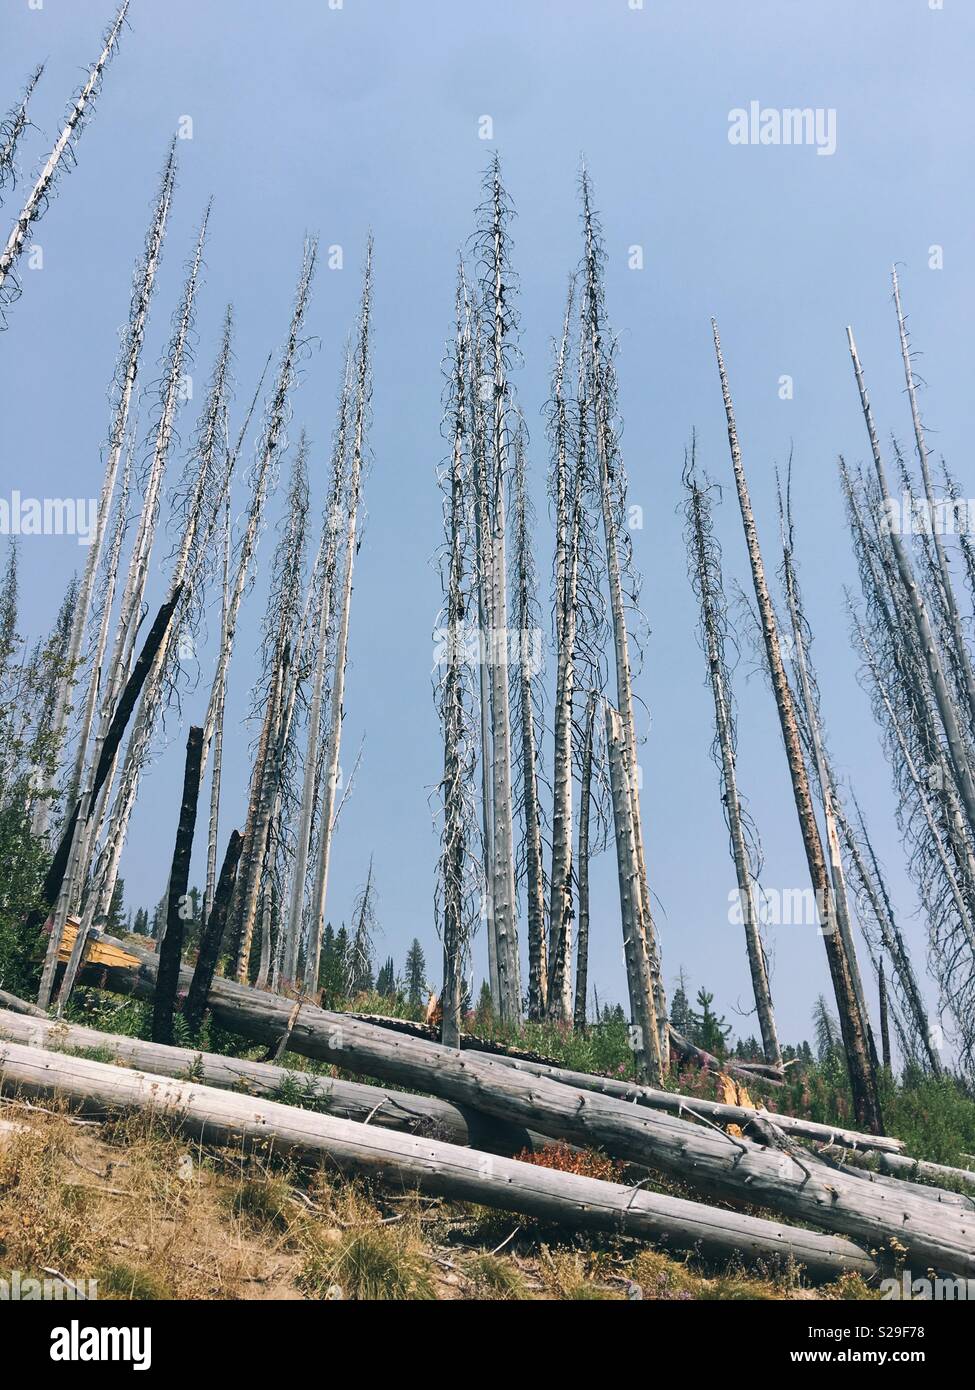 Dead trees and logs on a mountain hillside, with new growth starting to appear, several years after the area was burned by wildfire. Stock Photo